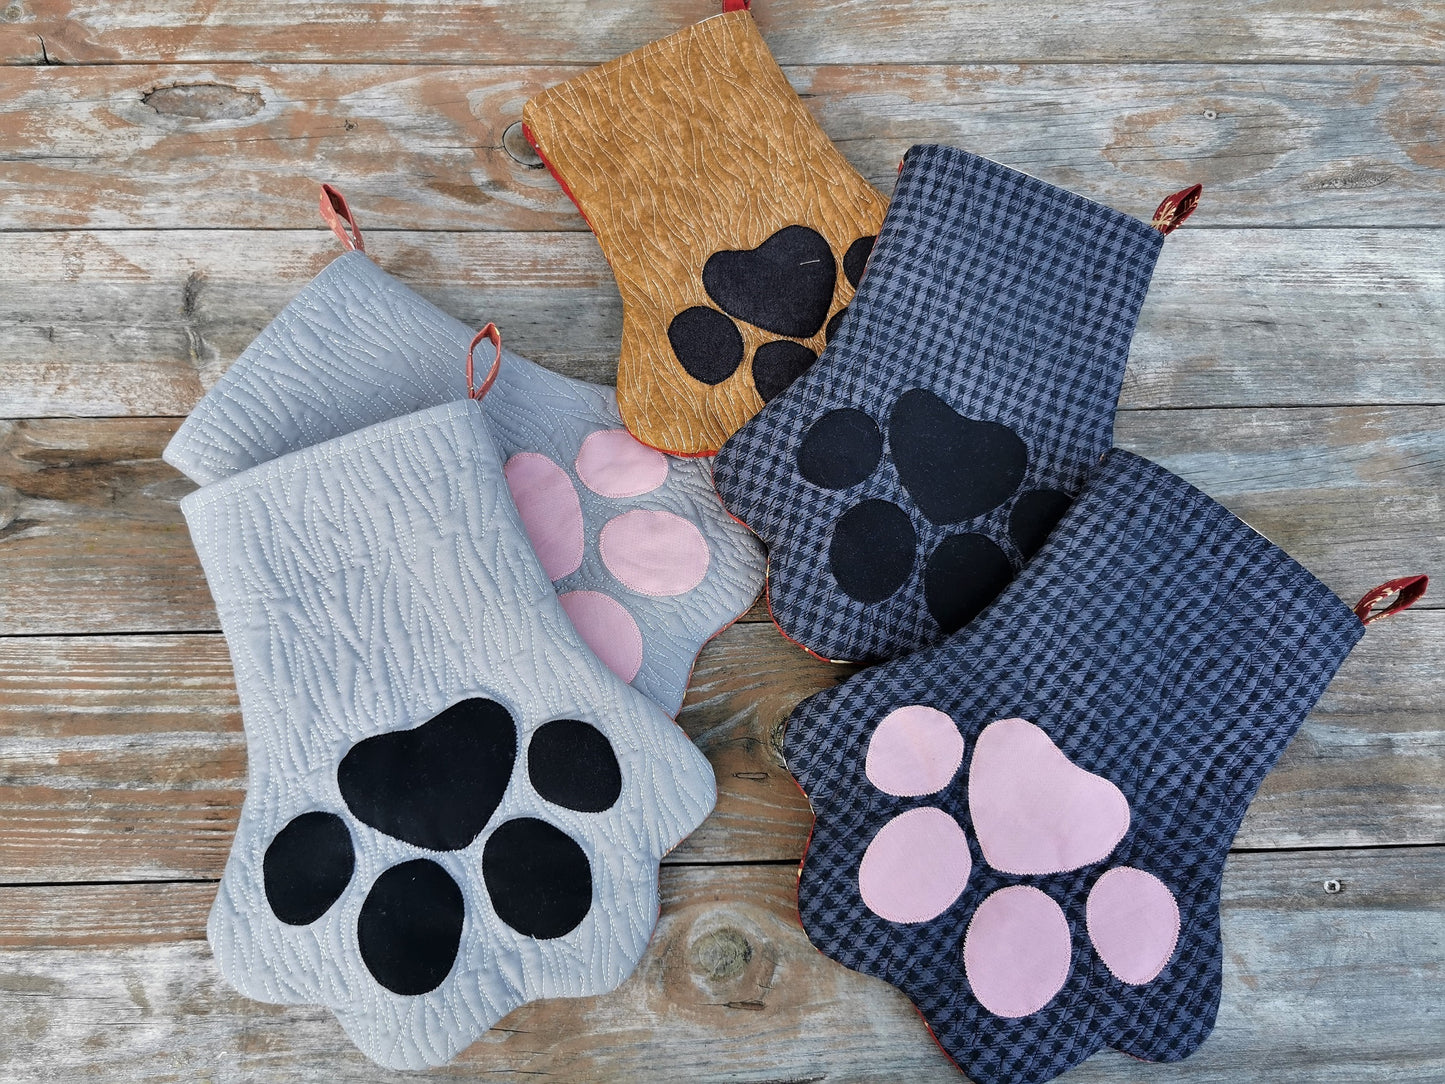 showing group shot of all pet stocking options available, sold separately